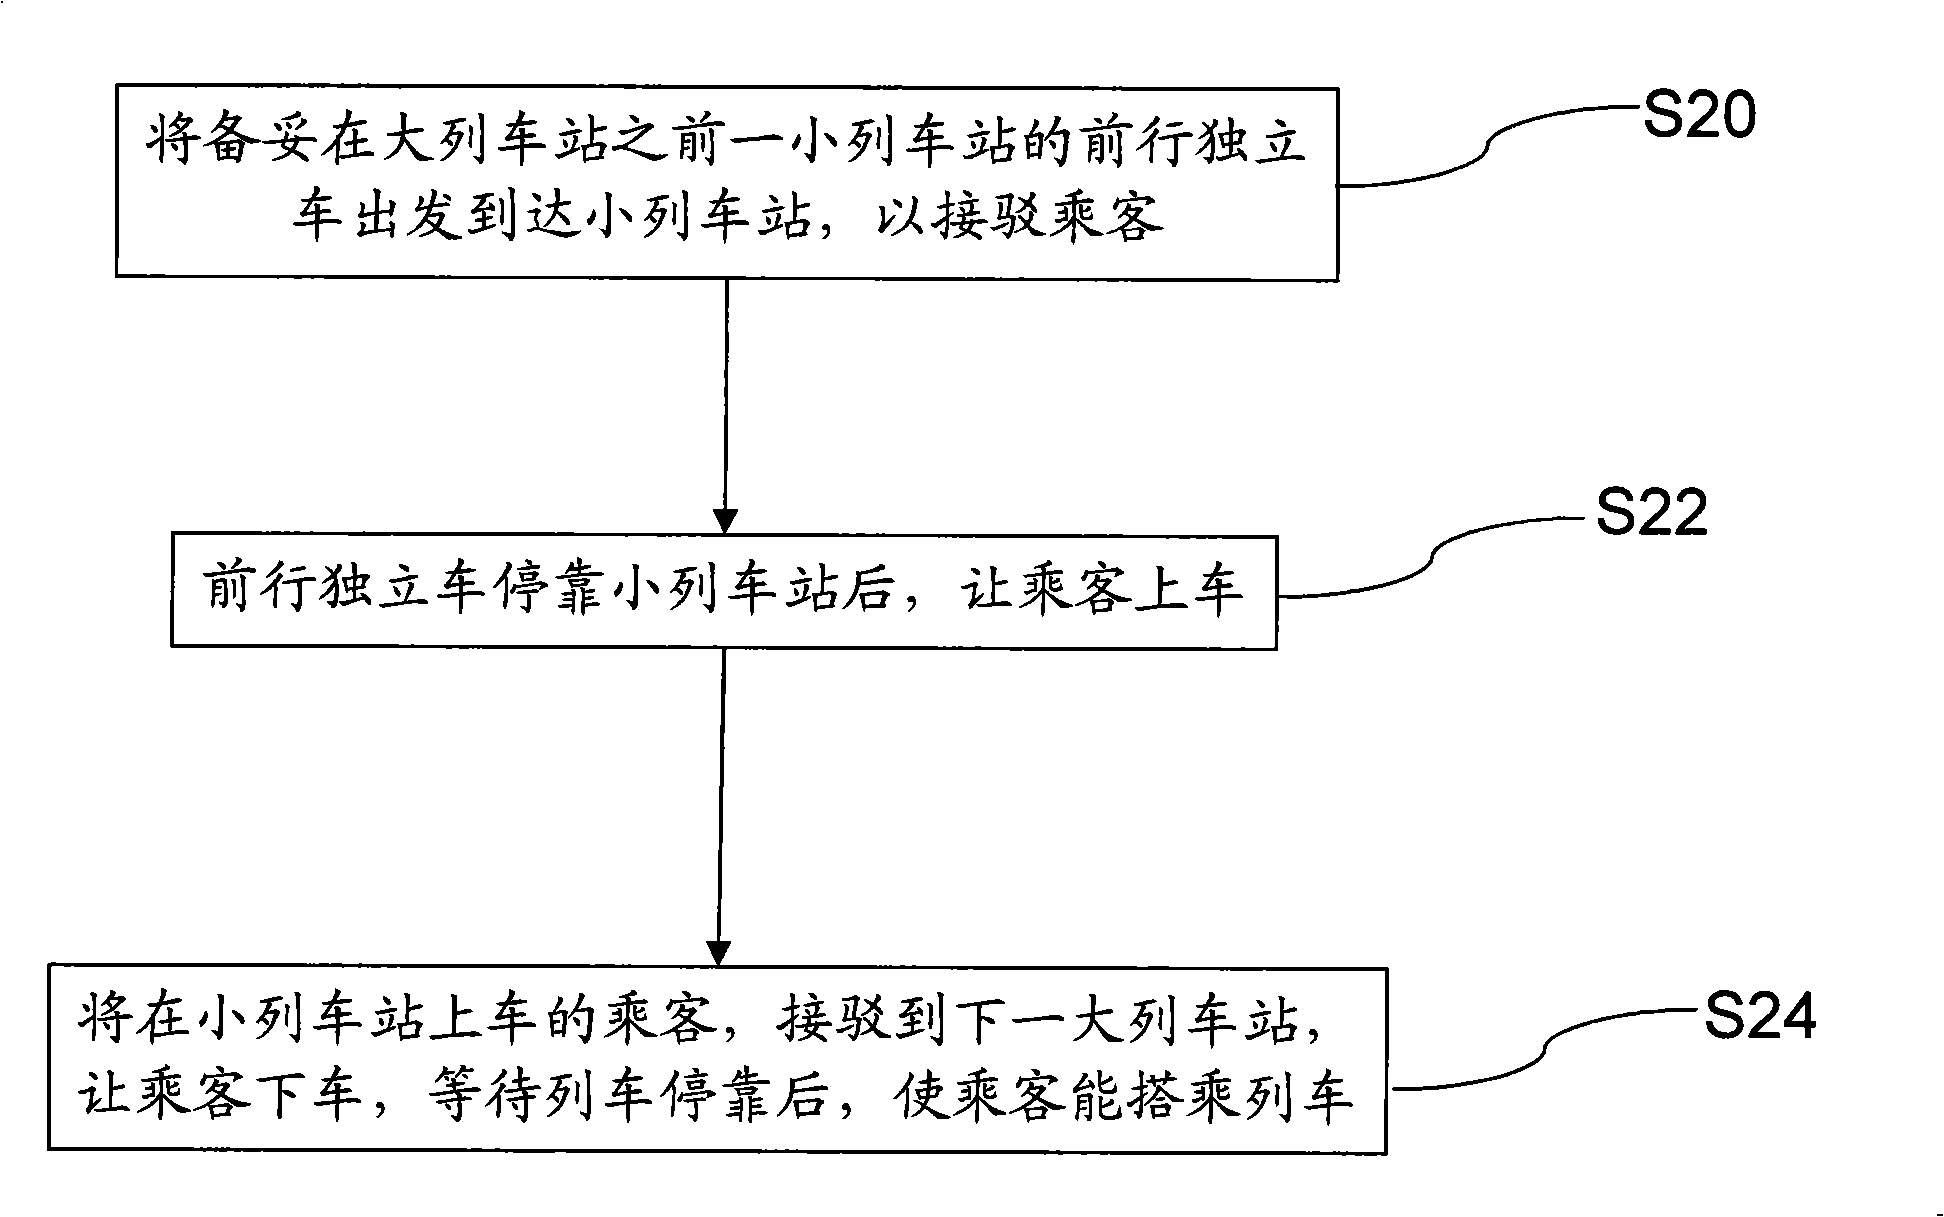 Method of transferring passenger with feeder vehicle when a train passes a station without stopping